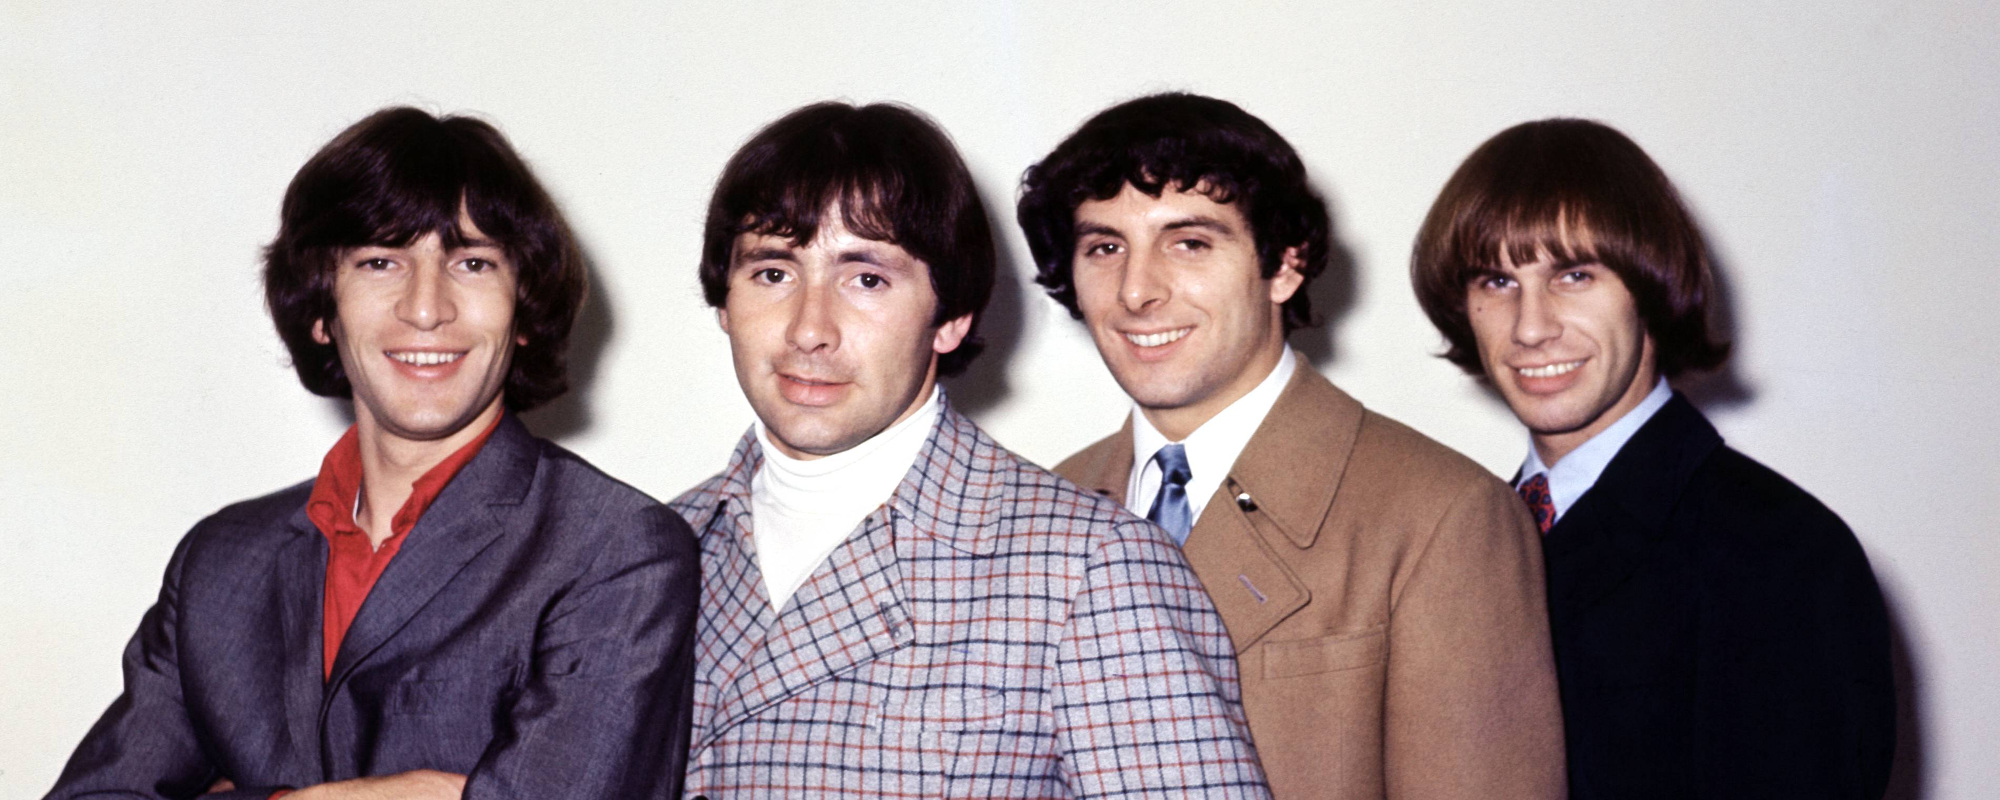 Who Really Wrote The Troggs’ Song, “Wild Thing”?